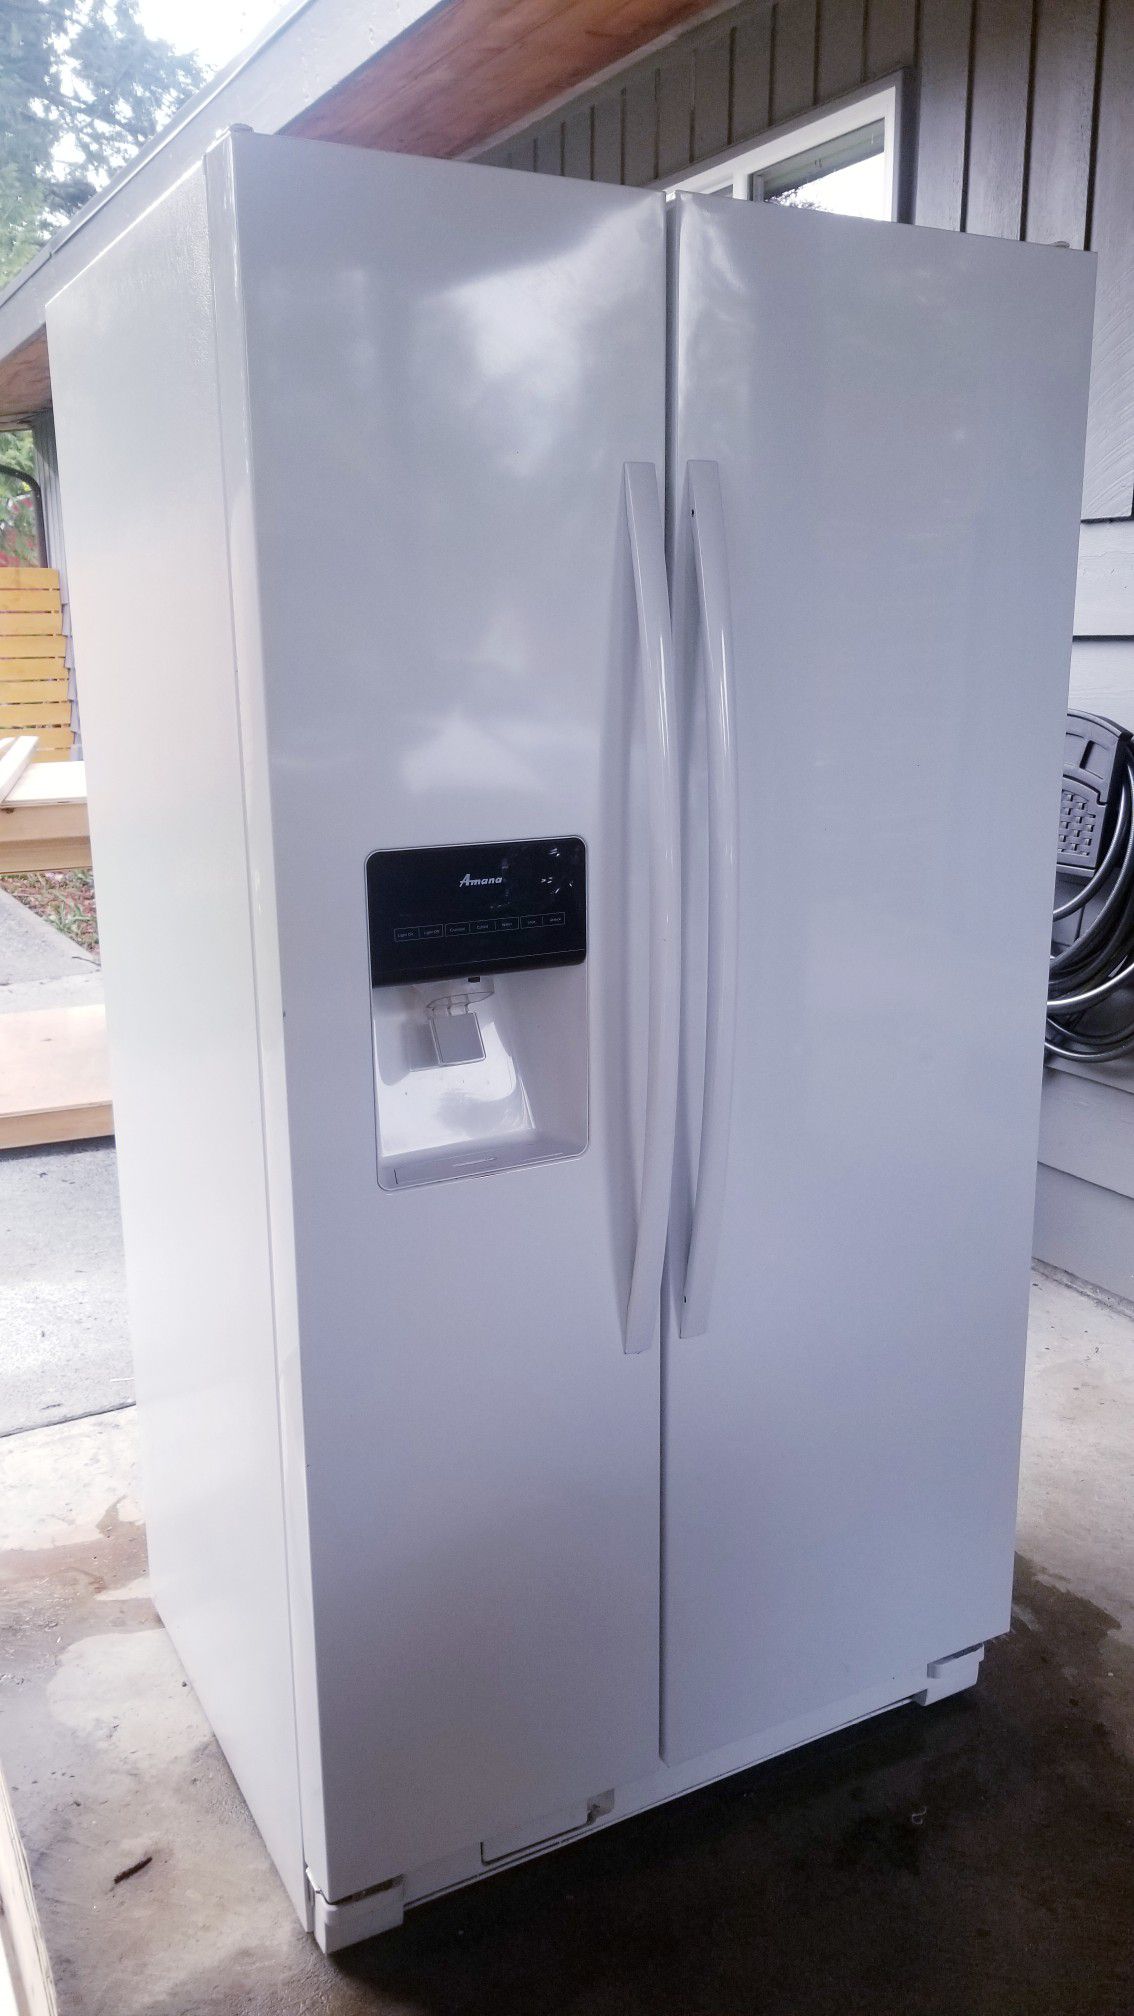 **LIKE NEW Amana / Whirlpool White Refrigerator with Ice Maker and Water Dispenser